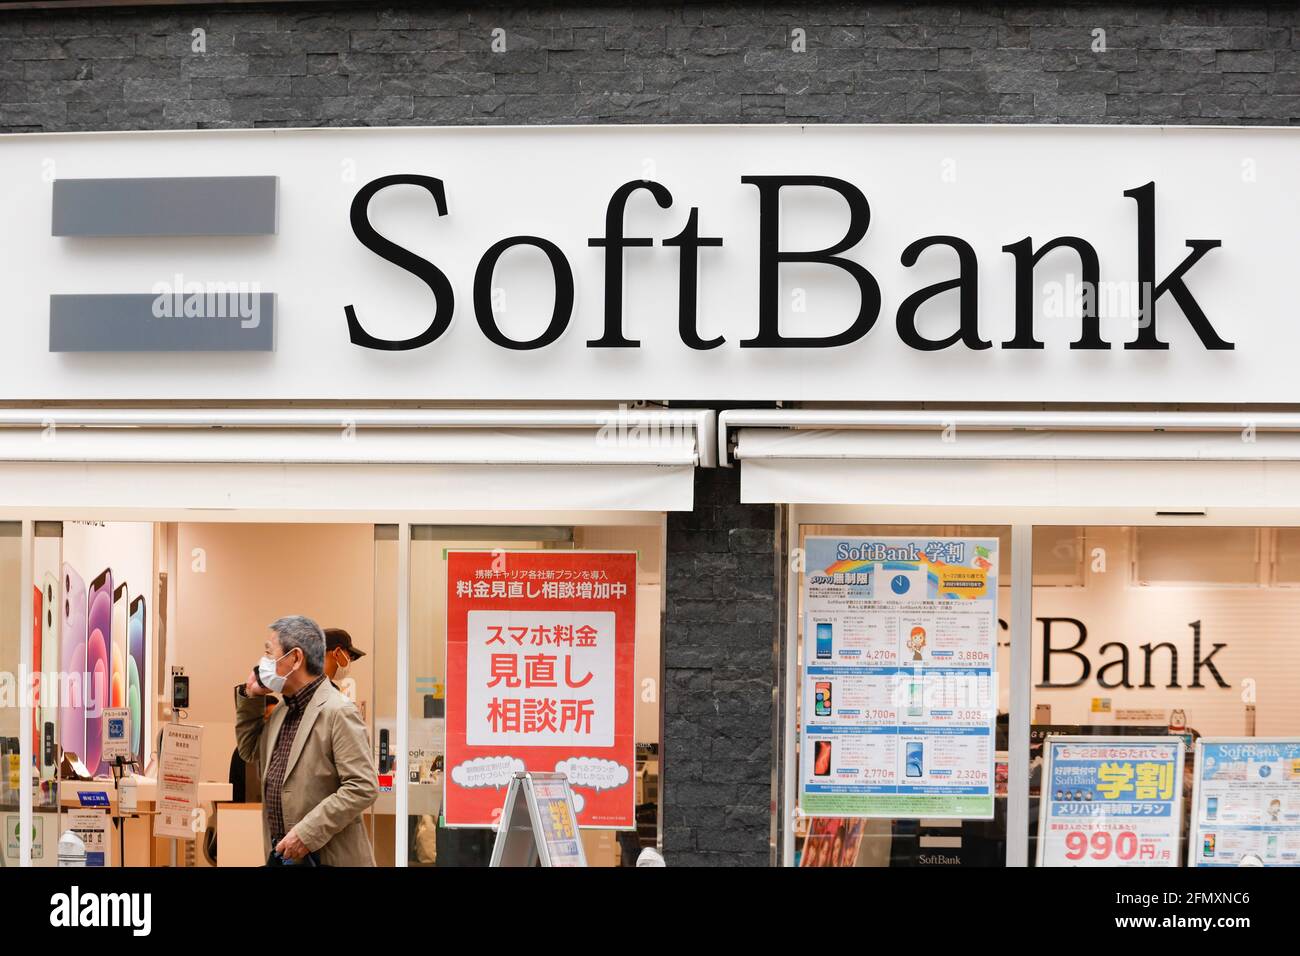 Logo Of Softbank High Resolution Stock Photography And Images Alamy